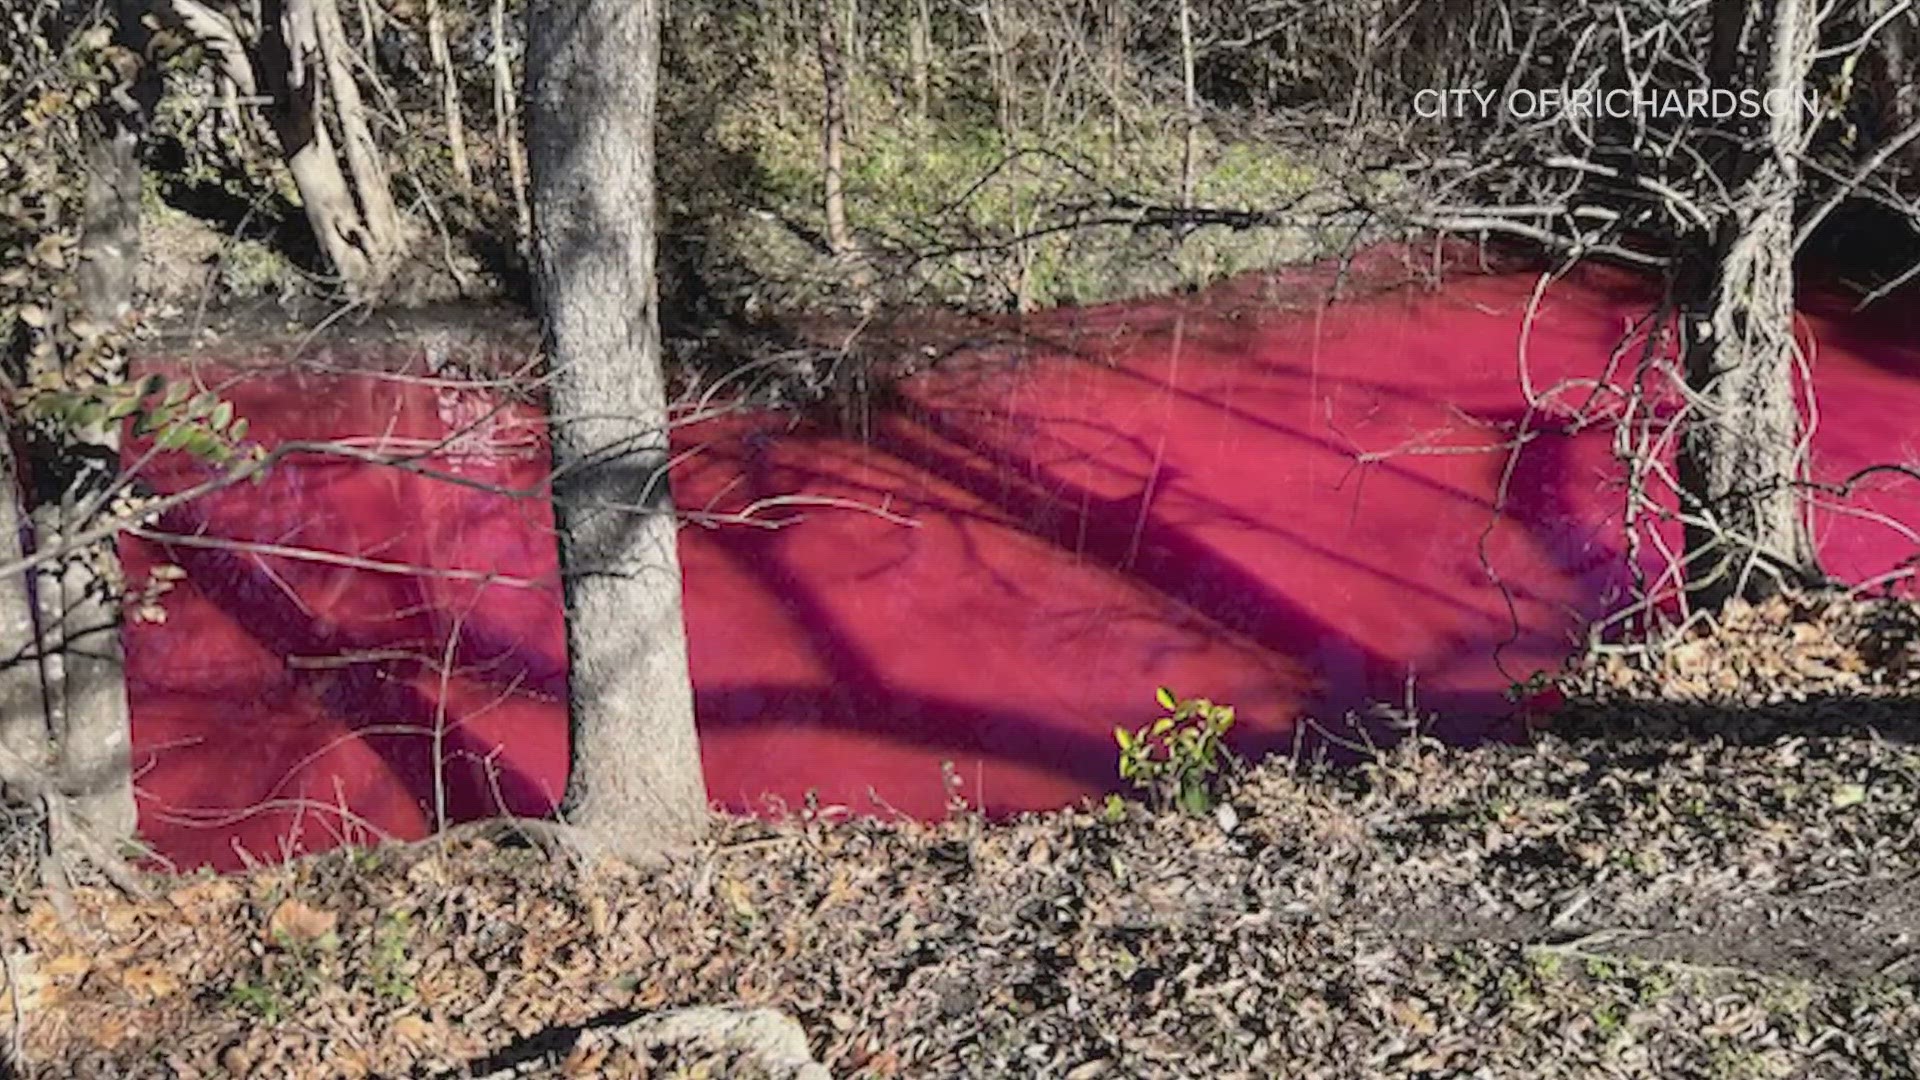 On Monday, someone called the Richardson police when they saw a creek filled with red liquid! Here's the story behind how it happened.